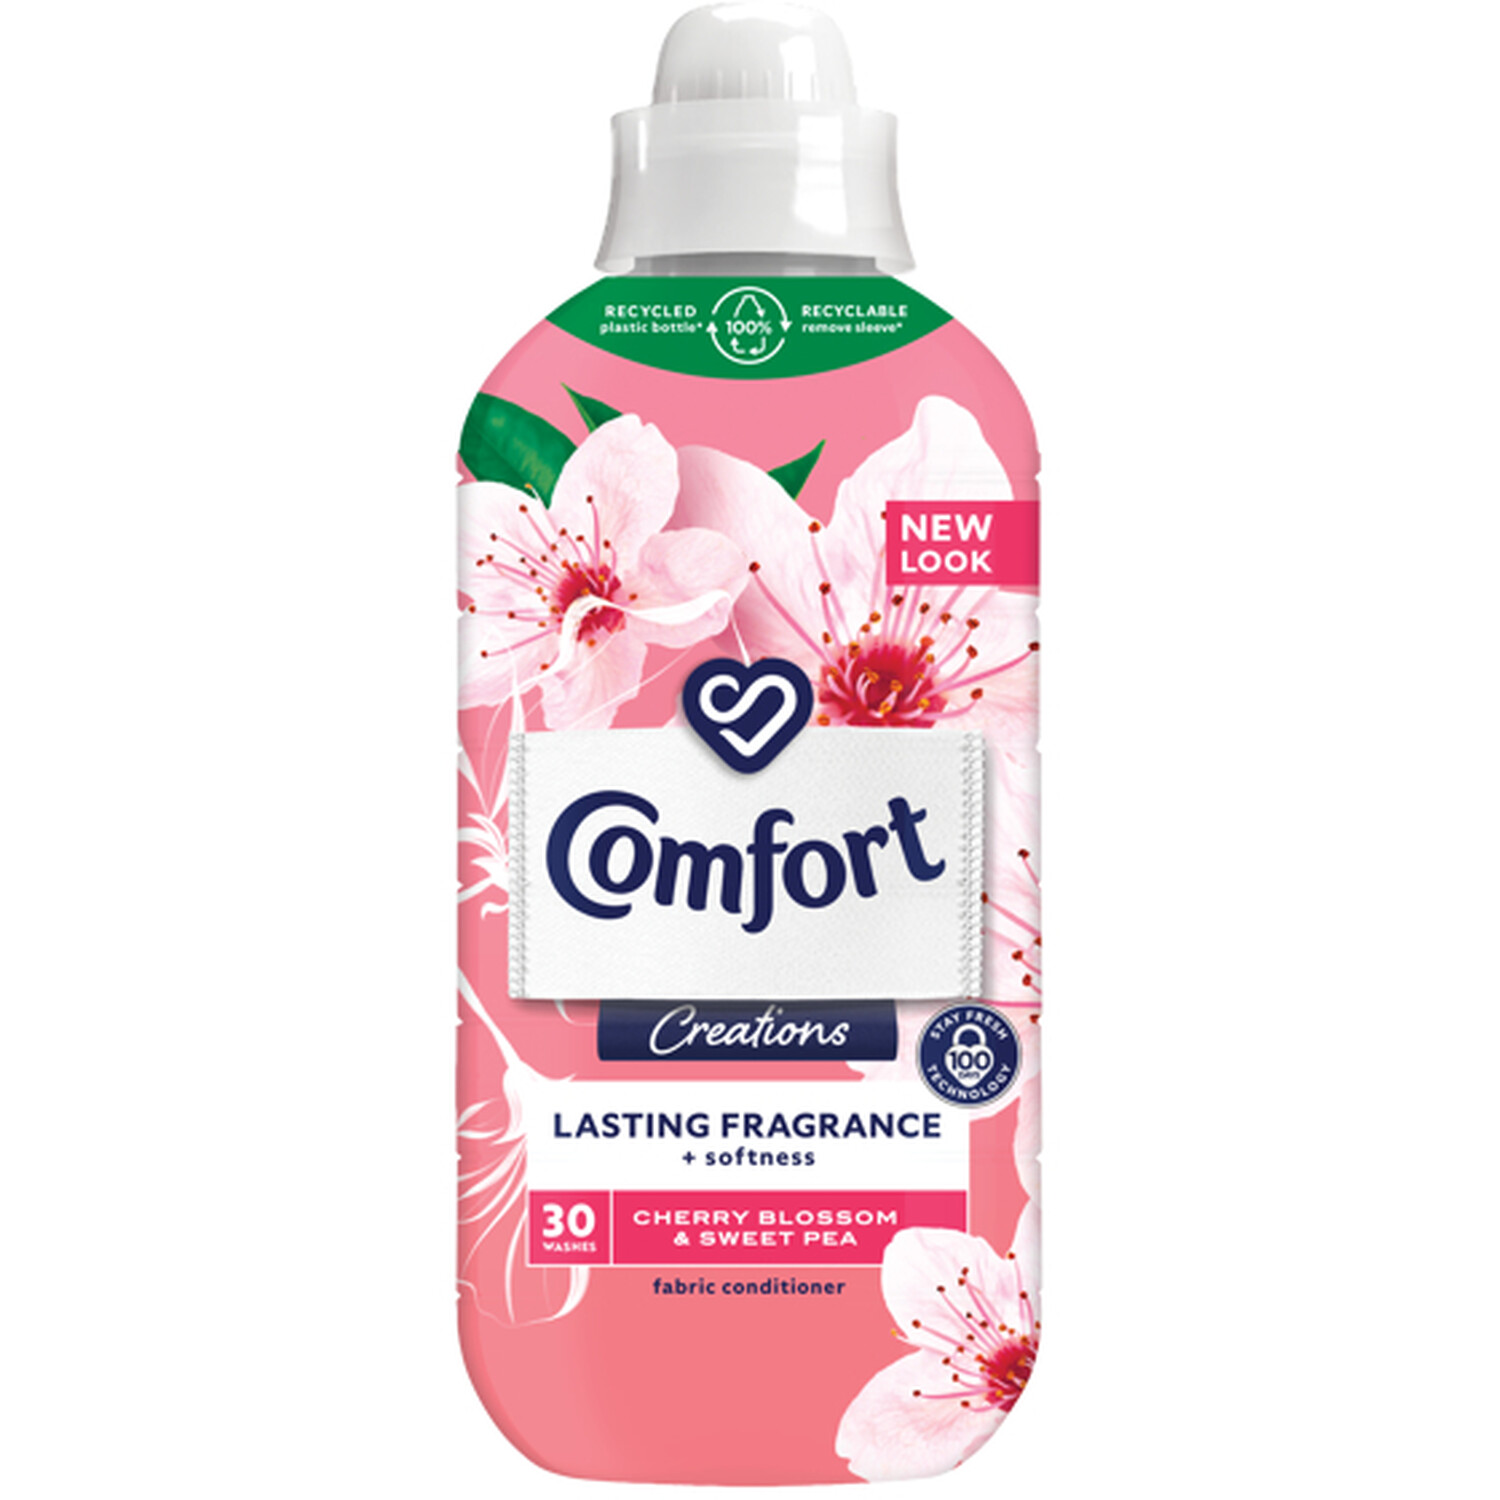 Comfort Cherry Blossom and Sweet Pea Fabric Conditioner 30 Washes 900ml Image